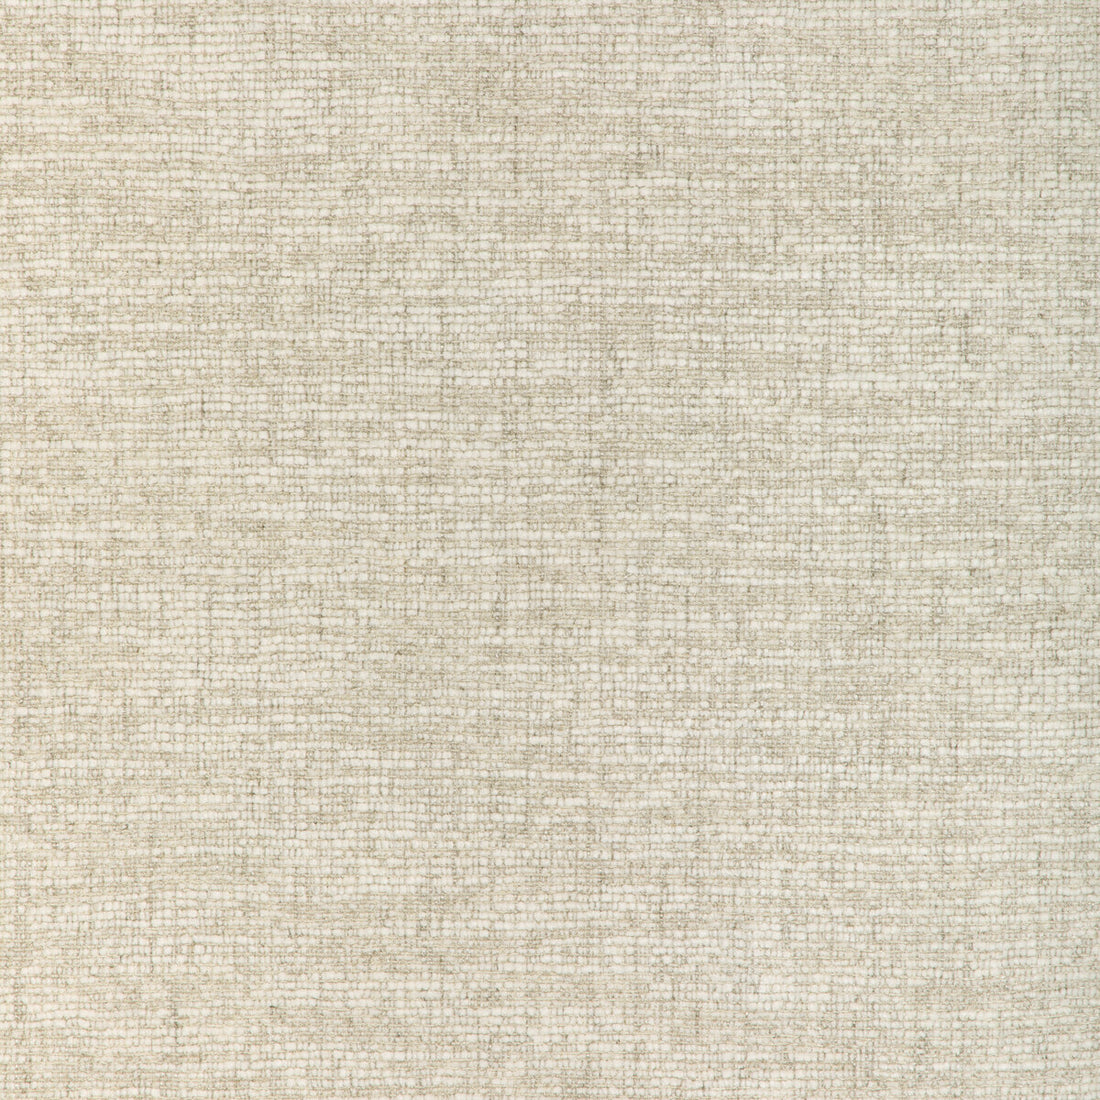 Chenille Aura fabric in linen color - pattern 36871.116.0 - by Kravet Couture in the Atelier Weaves collection